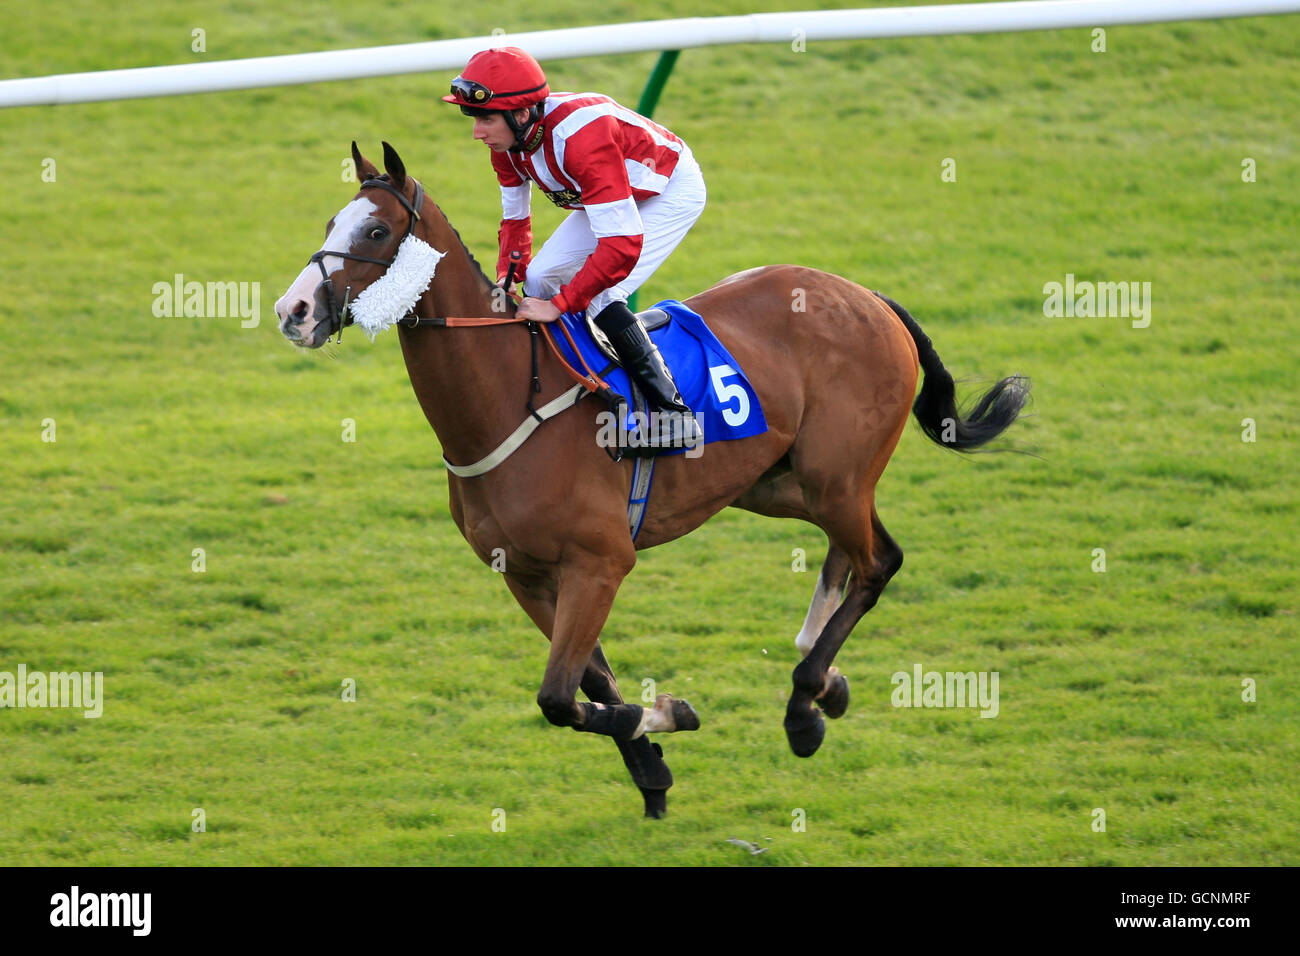 Horse Racing - William Hill Gold Cup Festival - Day Two - Ayr Racecourse. Jockey James P Sullivan on Summer Soul goes to post in the Investec Structured Products Handicap Stock Photo